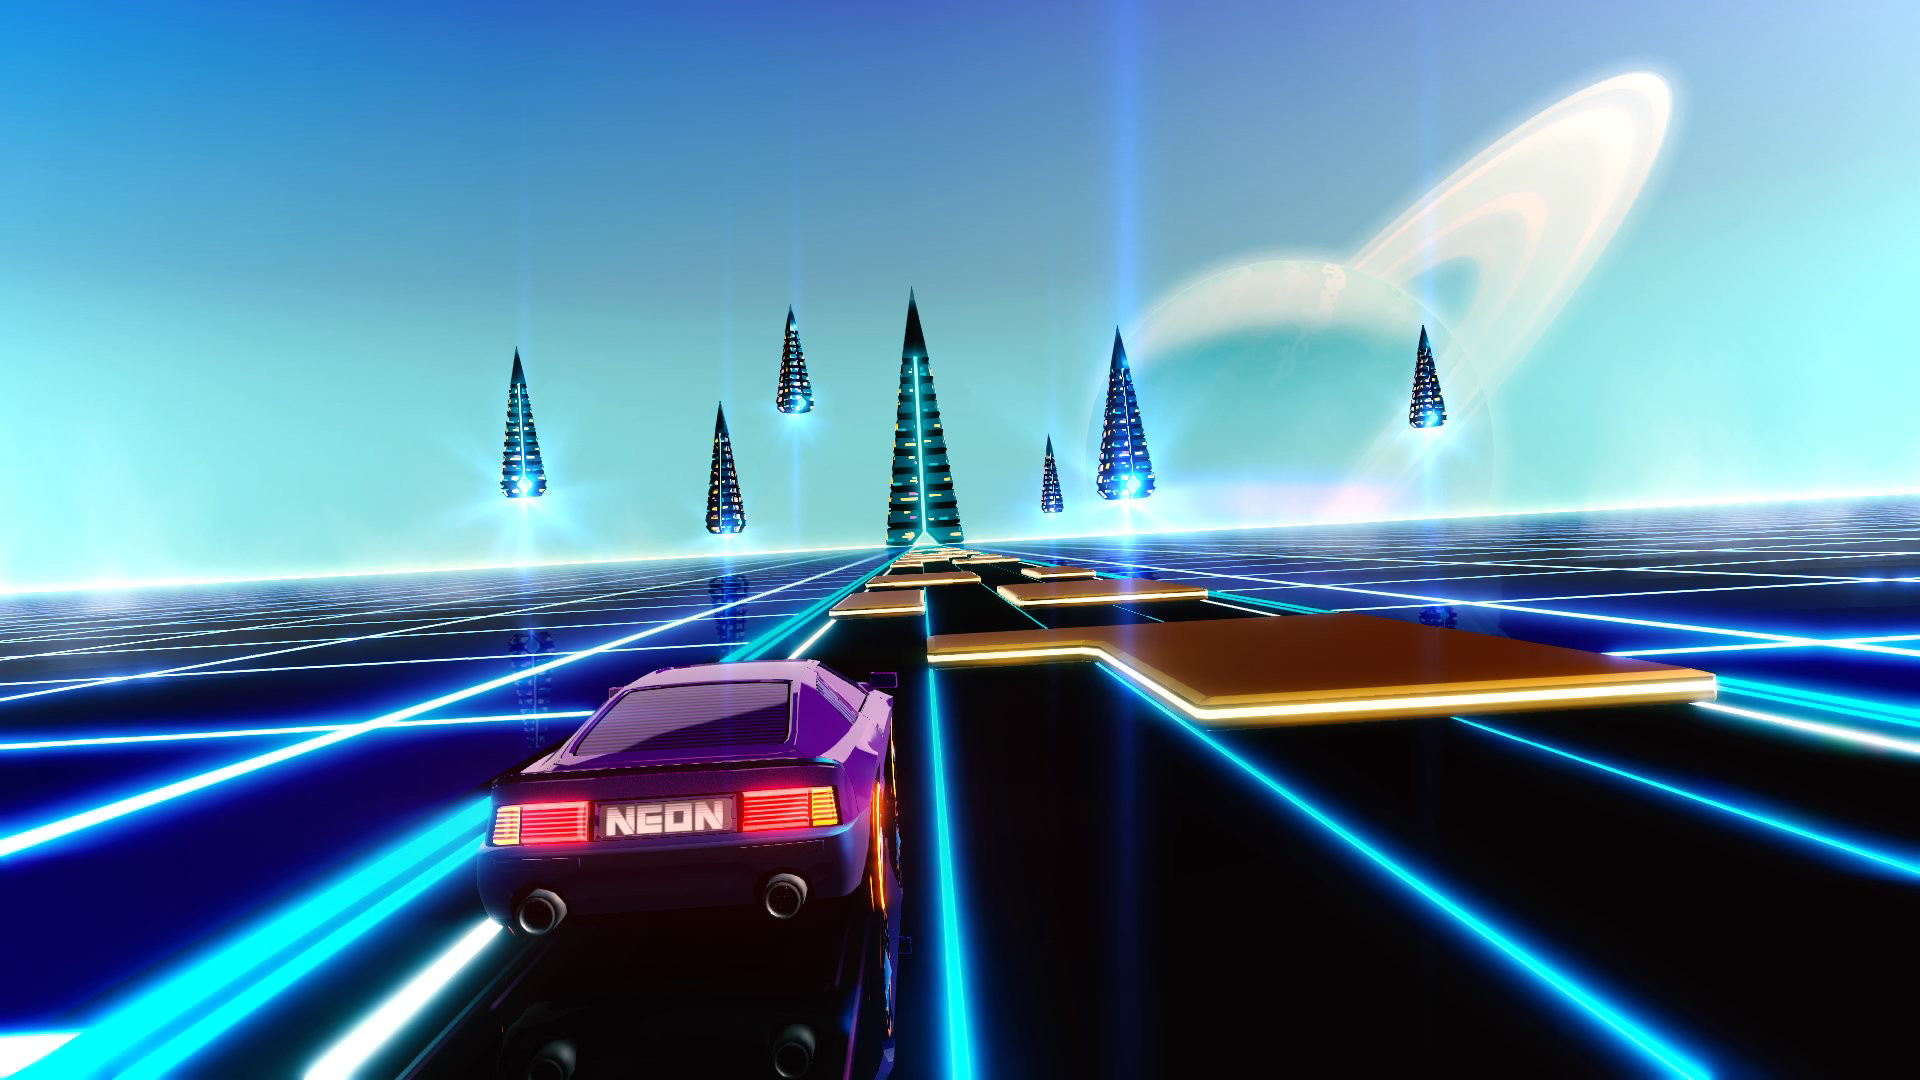 1920x1080 Go back to the '80s with Neon Drive